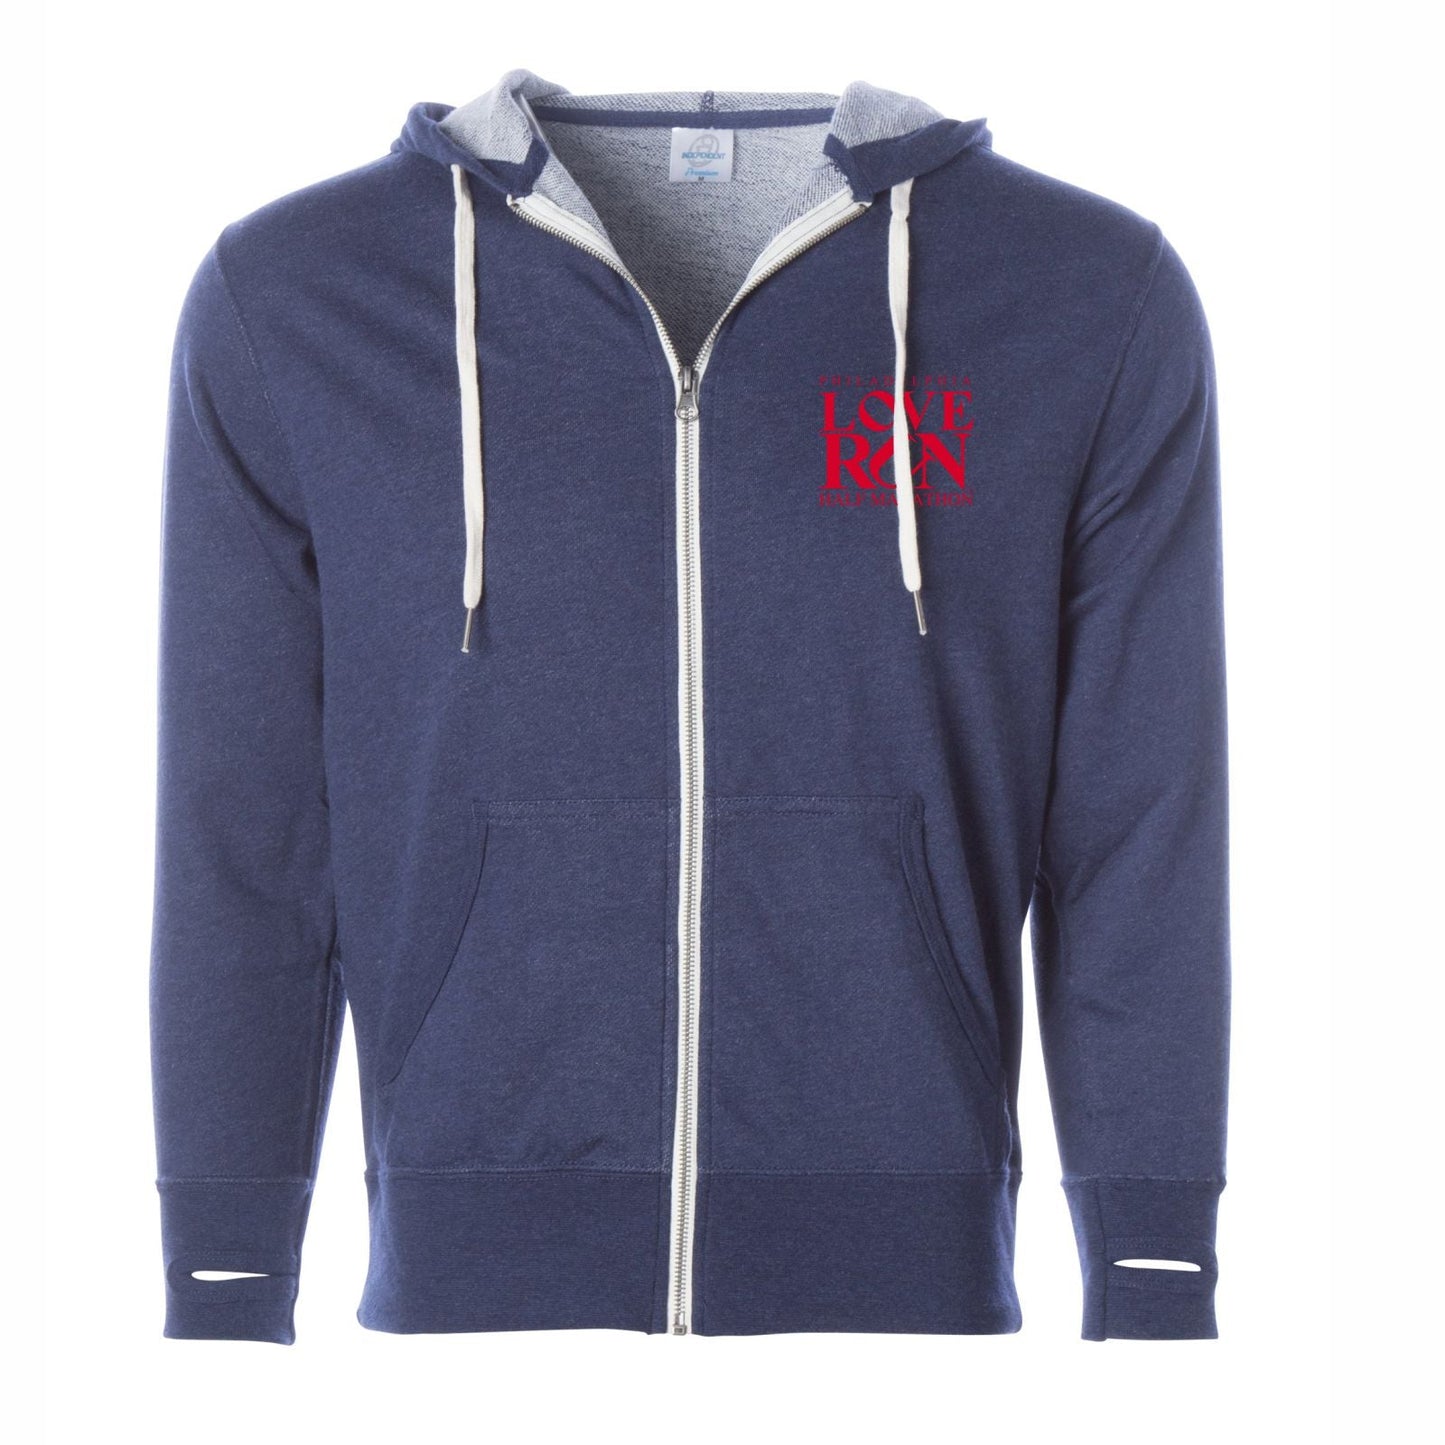 Adult French Terry Zip Hoody -Navy Heather- Embroidery